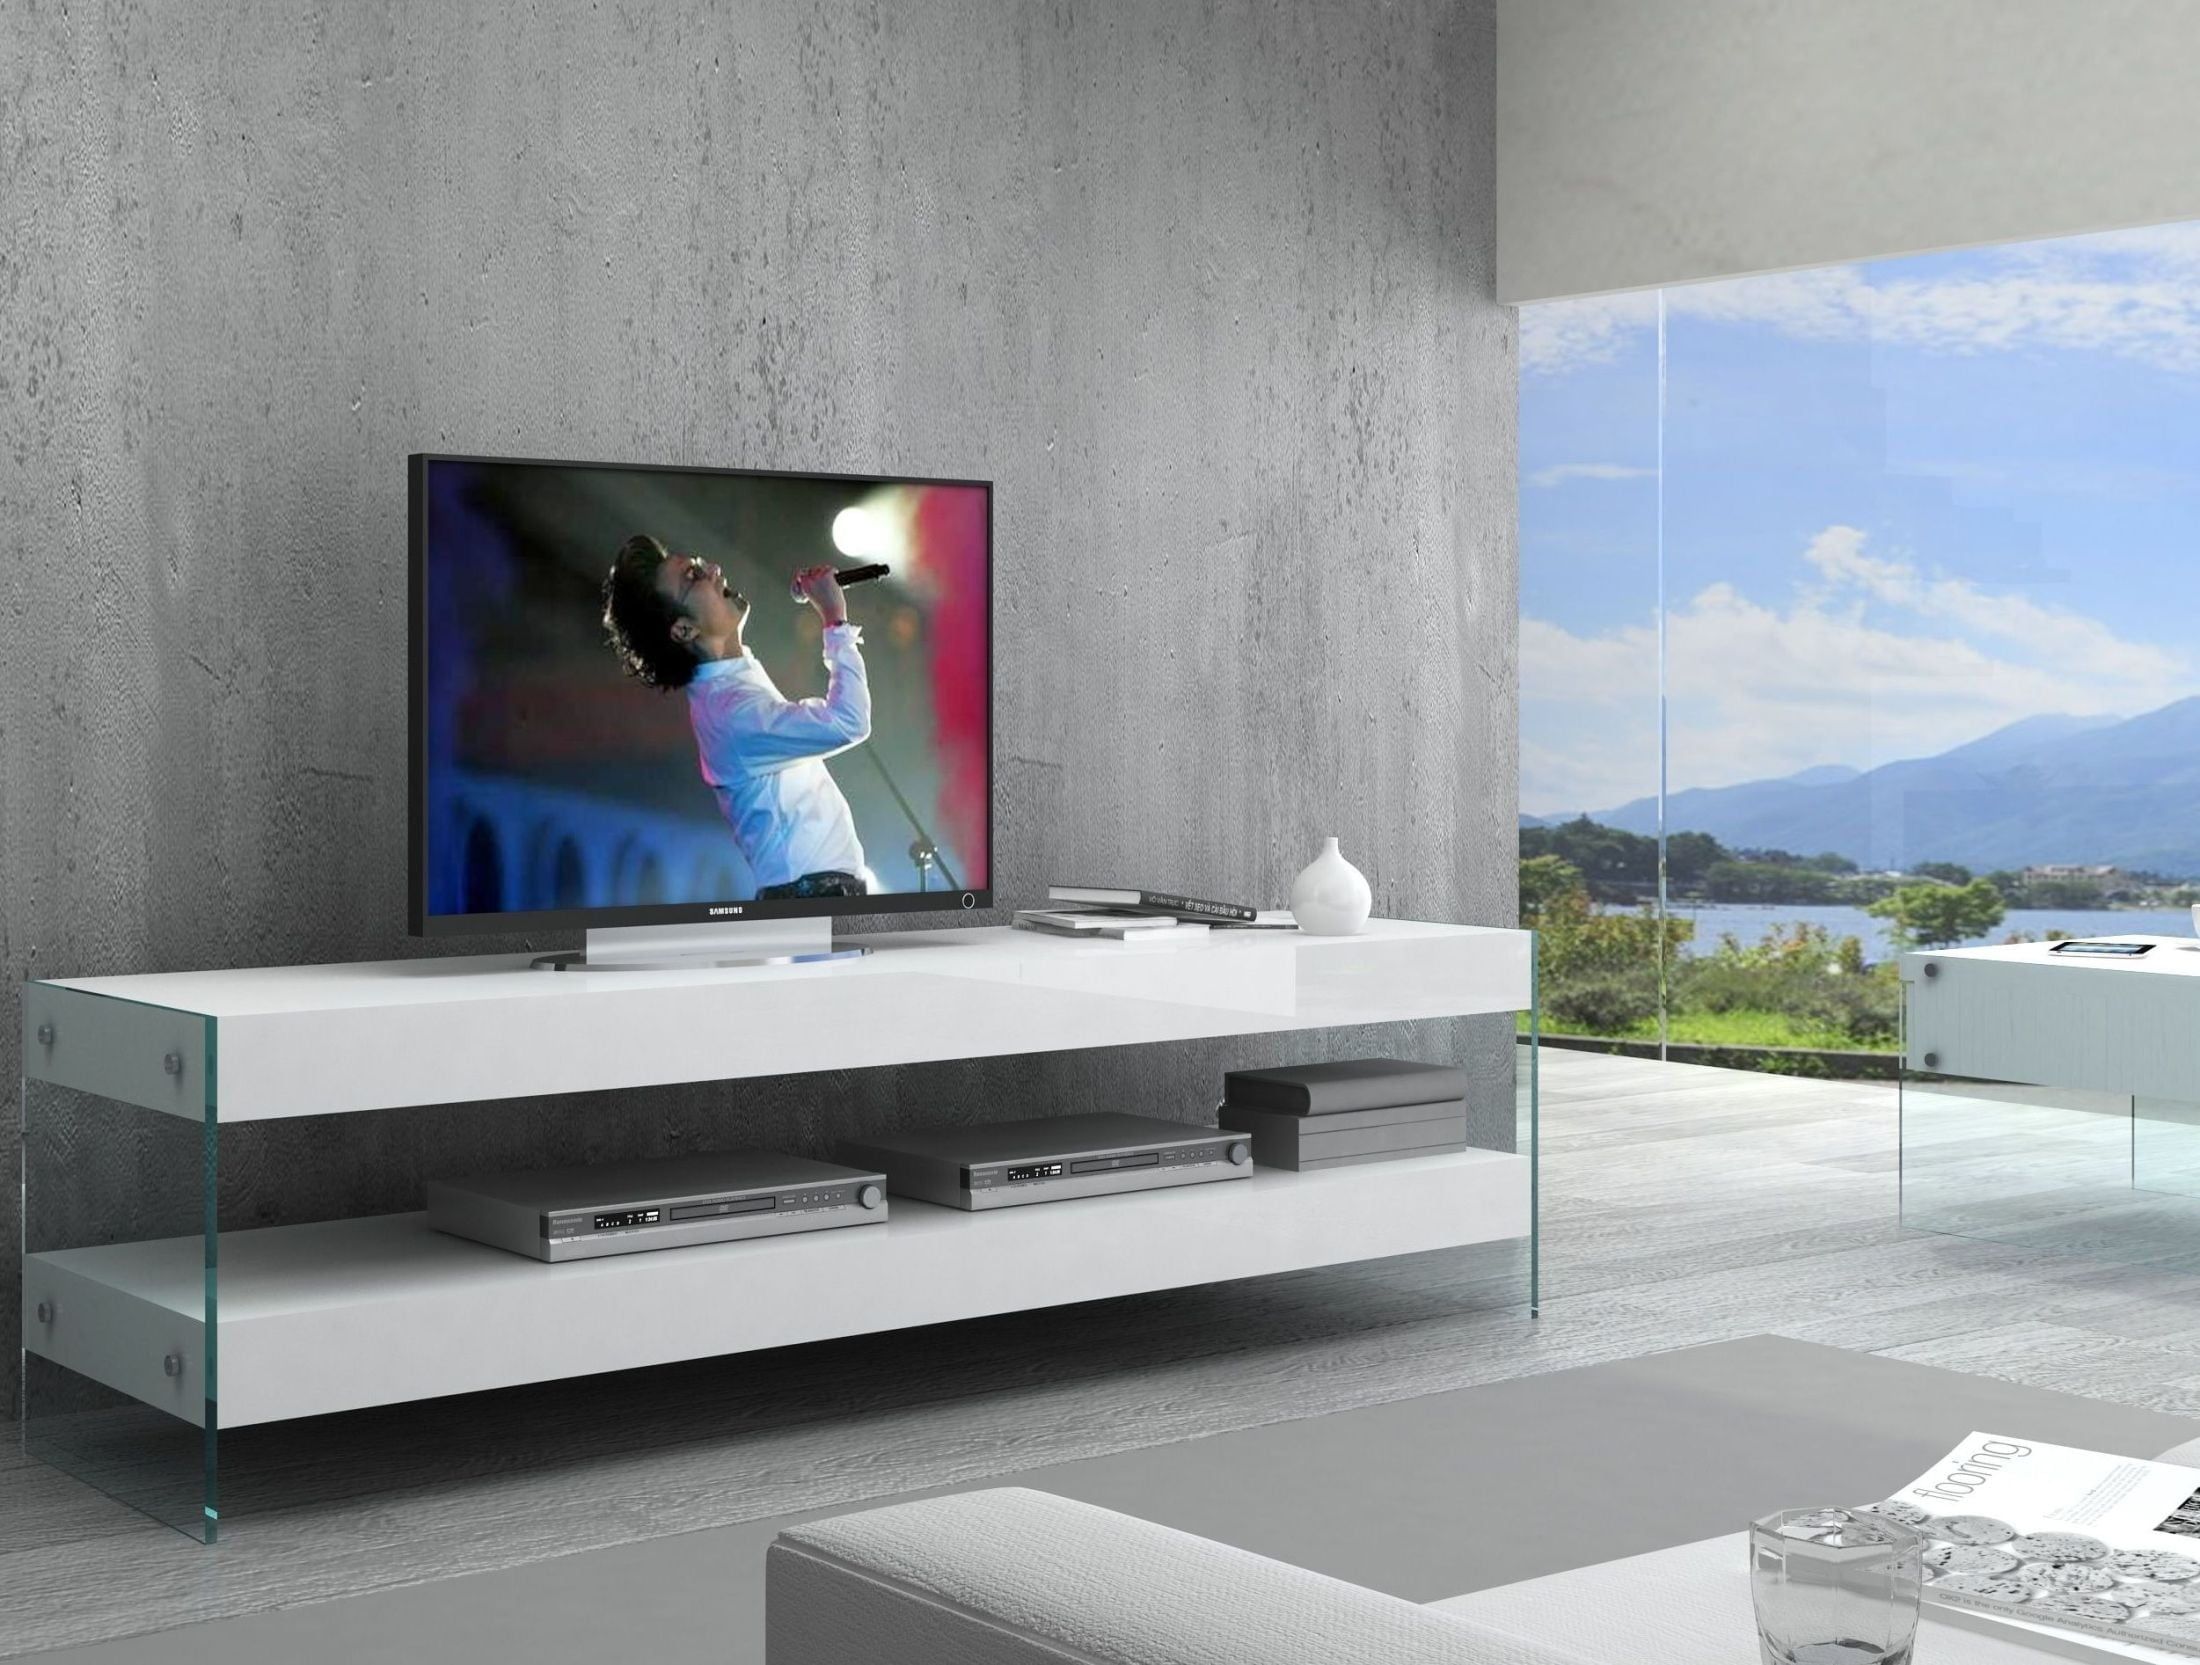 Cloud White High Gloss Tv Stand From Jnm | Coleman Furniture Throughout Glossy White Tv Stands (View 3 of 15)